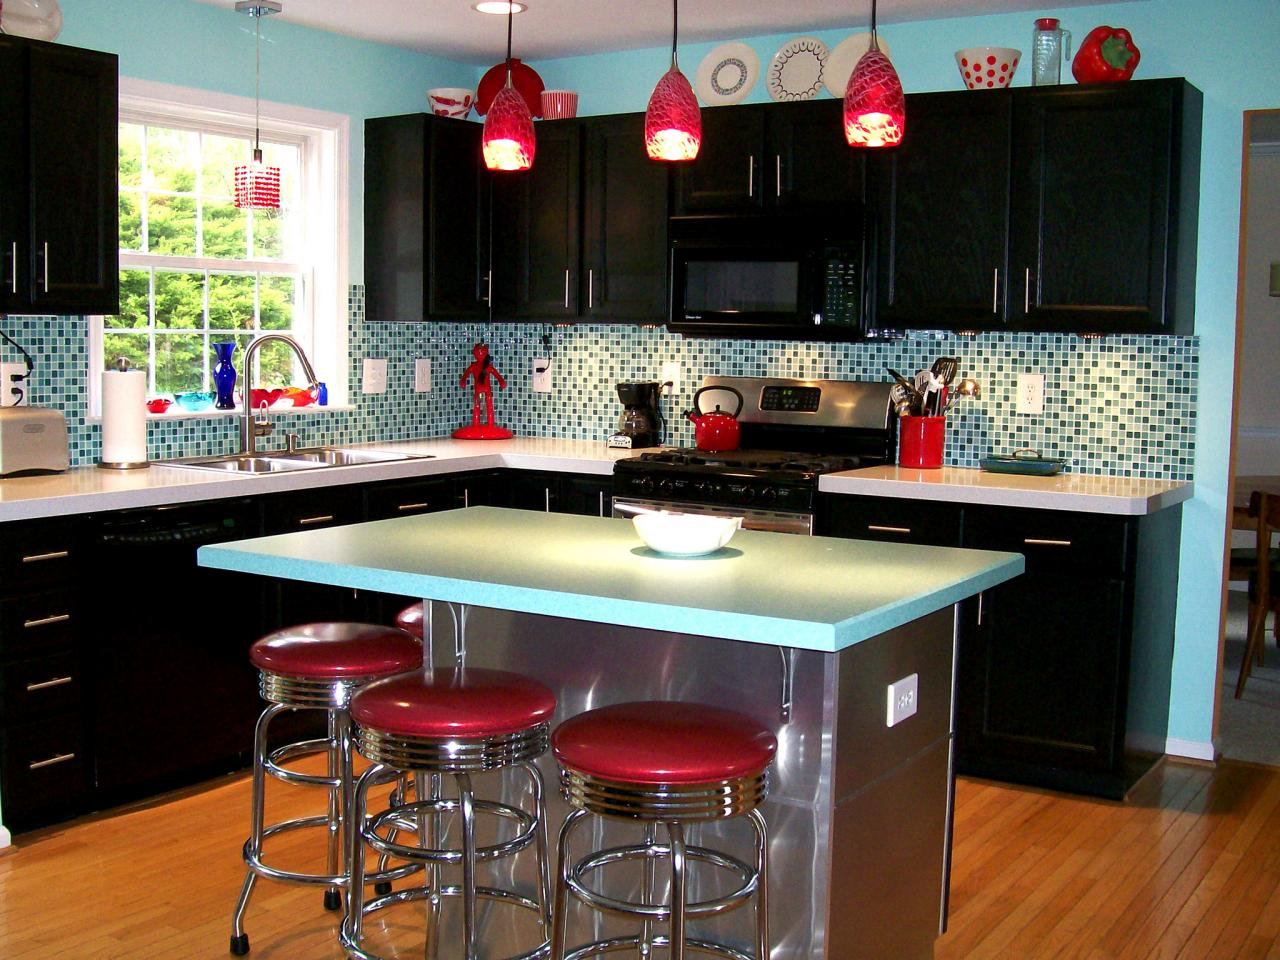 6 Things To Consider Before Remodeling Your Kitchen